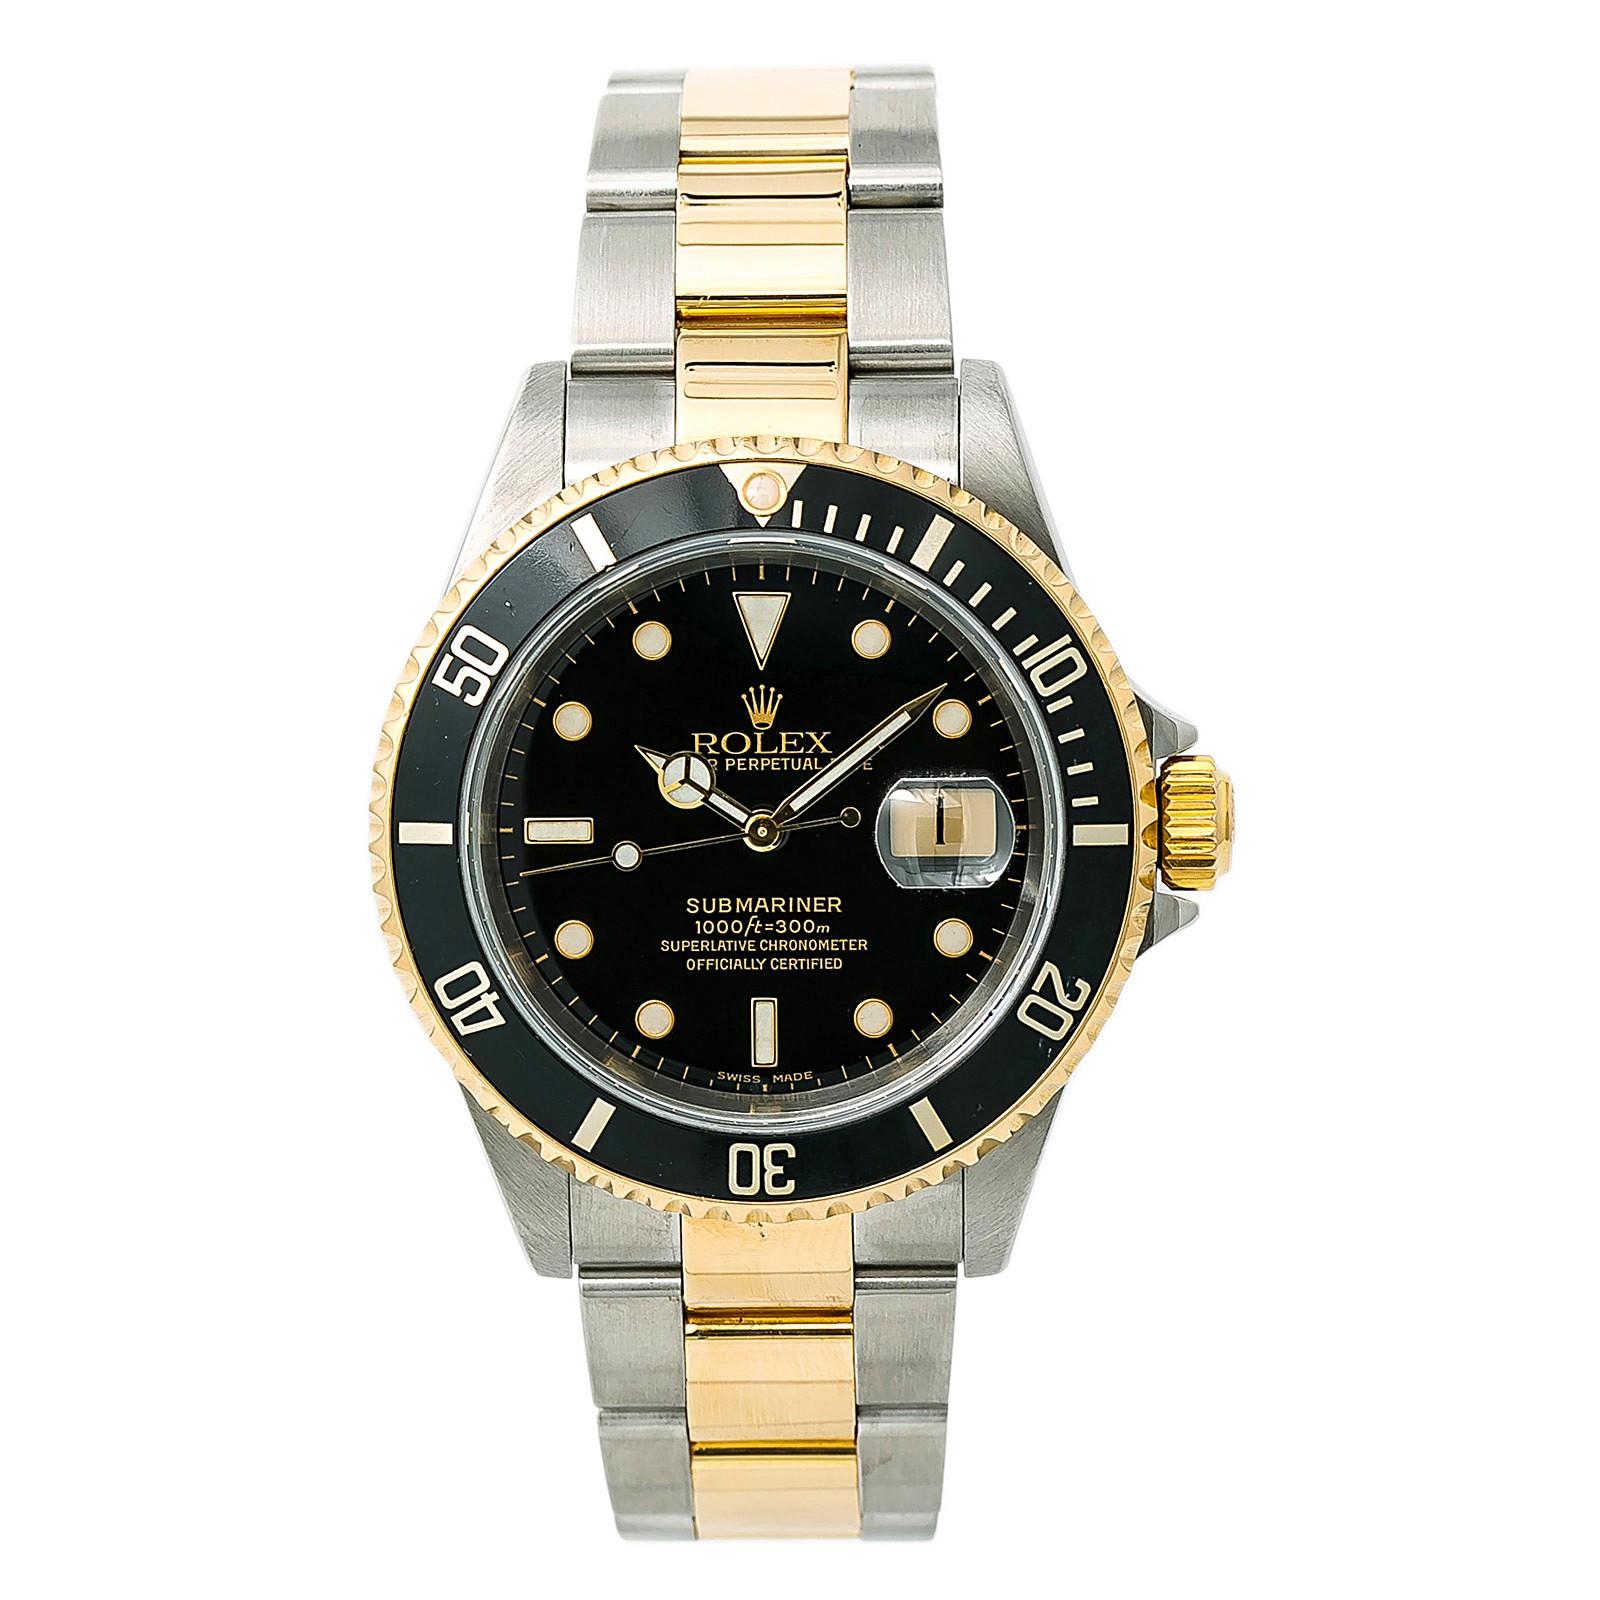 Rolex Submariner 16613 Men's Automatic Watch Black Dial Two-Tone Gold Buckle For Sale